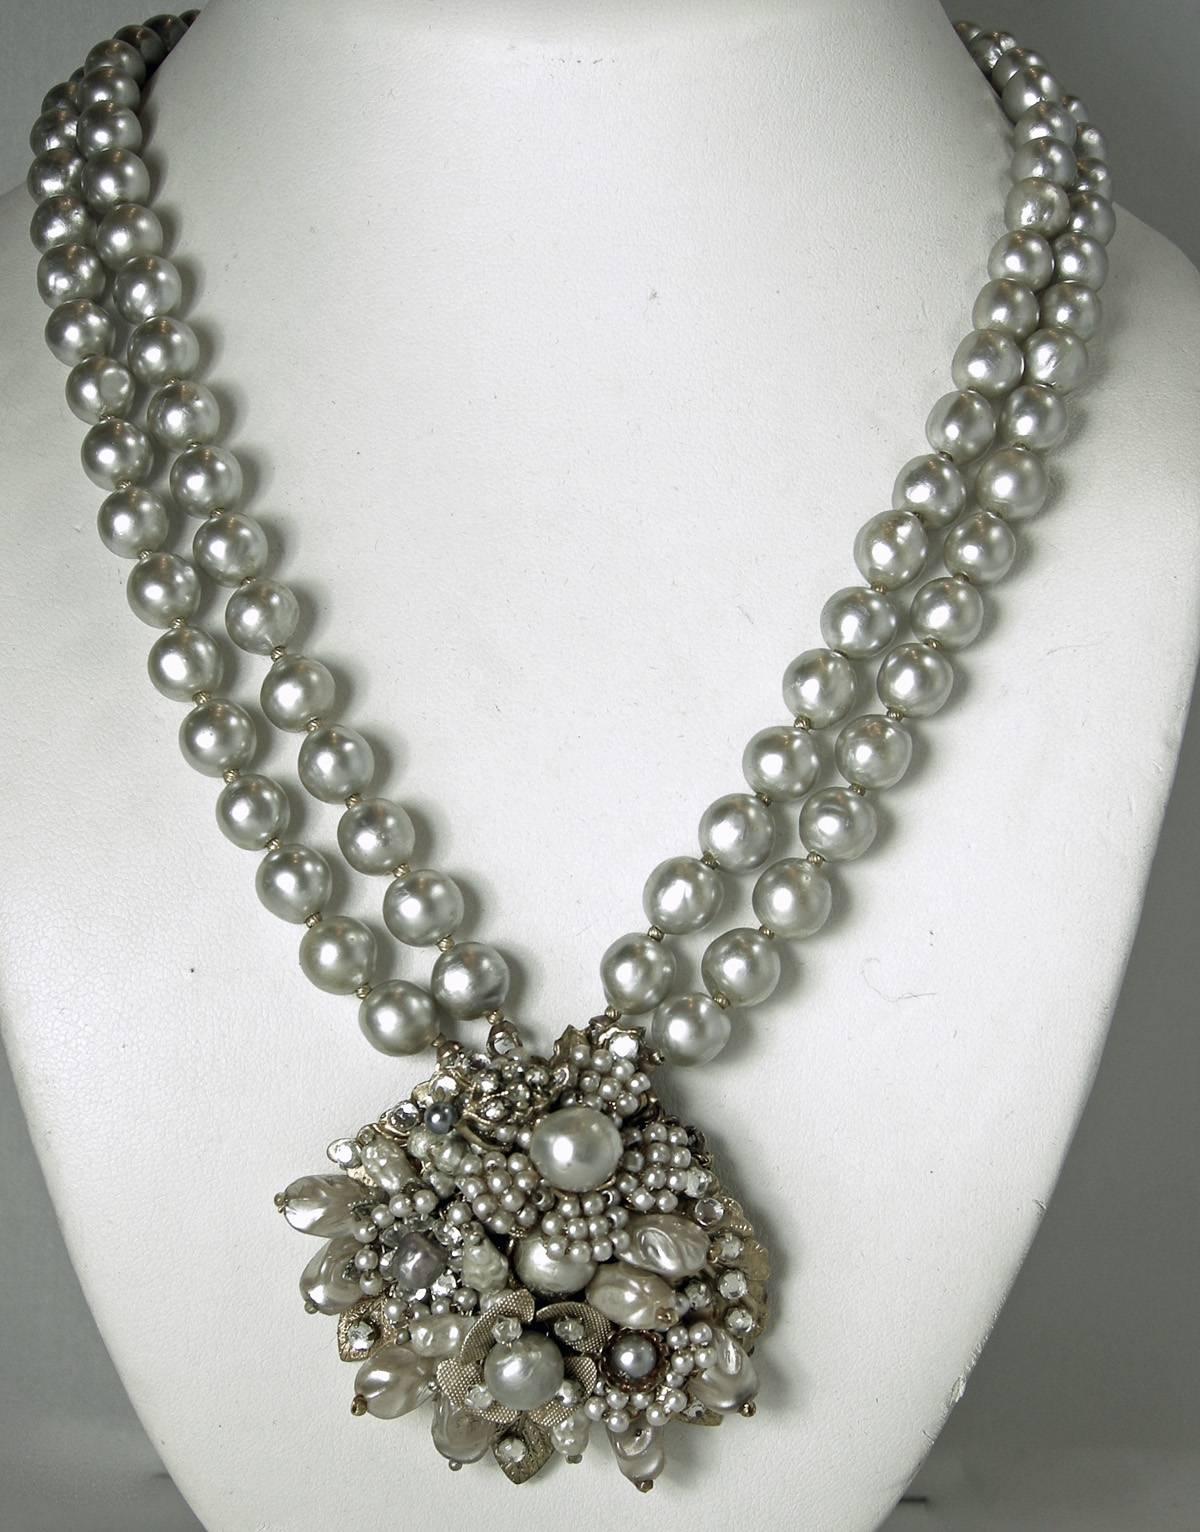 This vintage 1950s double strand Miriam Haskell necklace has faux gray pearls with small golden beads in between. It leads downward toward a centerpiece that has a golden flower at the bottom and three floral clusters of faux seed pearls. The border